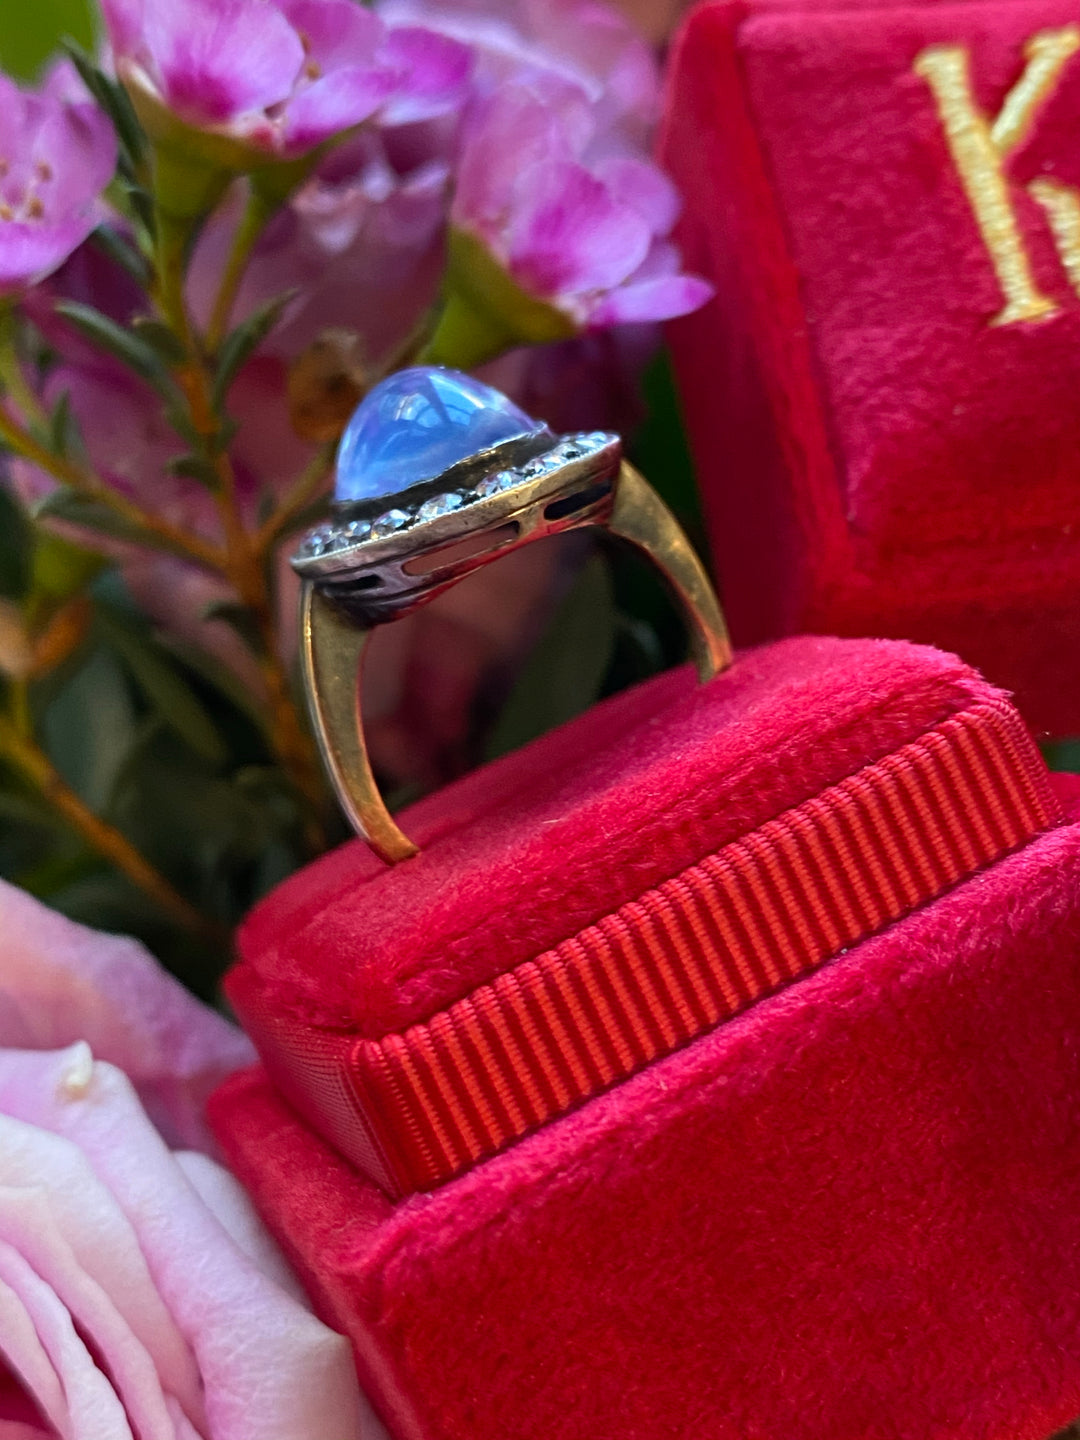 9.00 Carat Antique Blue Ceylon No Heat Cabochon Sapphire and Diamond Ring in 18ct Yellow Gold and Silver